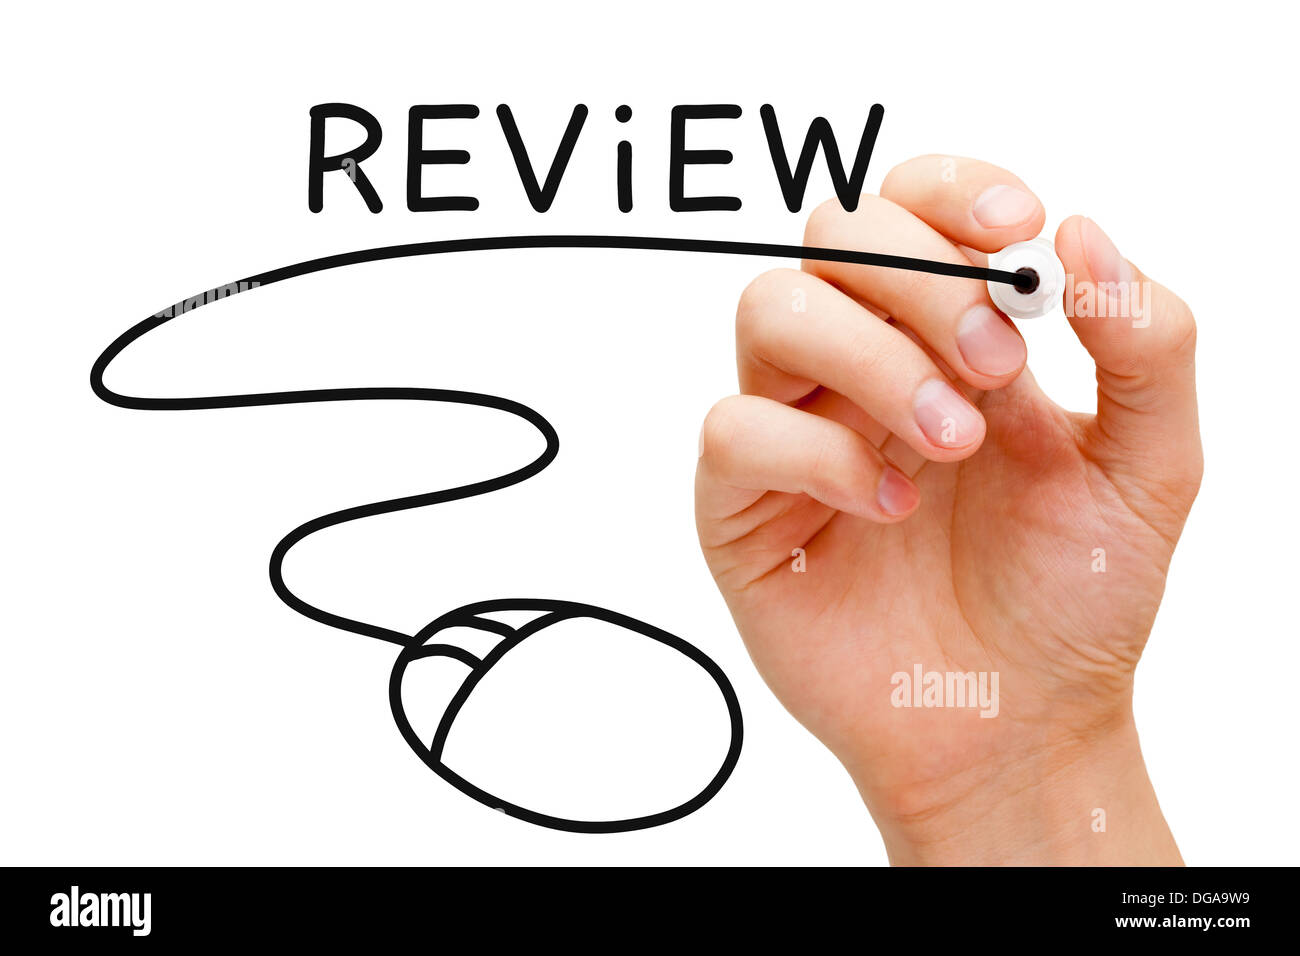 Hand sketching Online Review Concept with black marker on transparent wipe board. Stock Photo